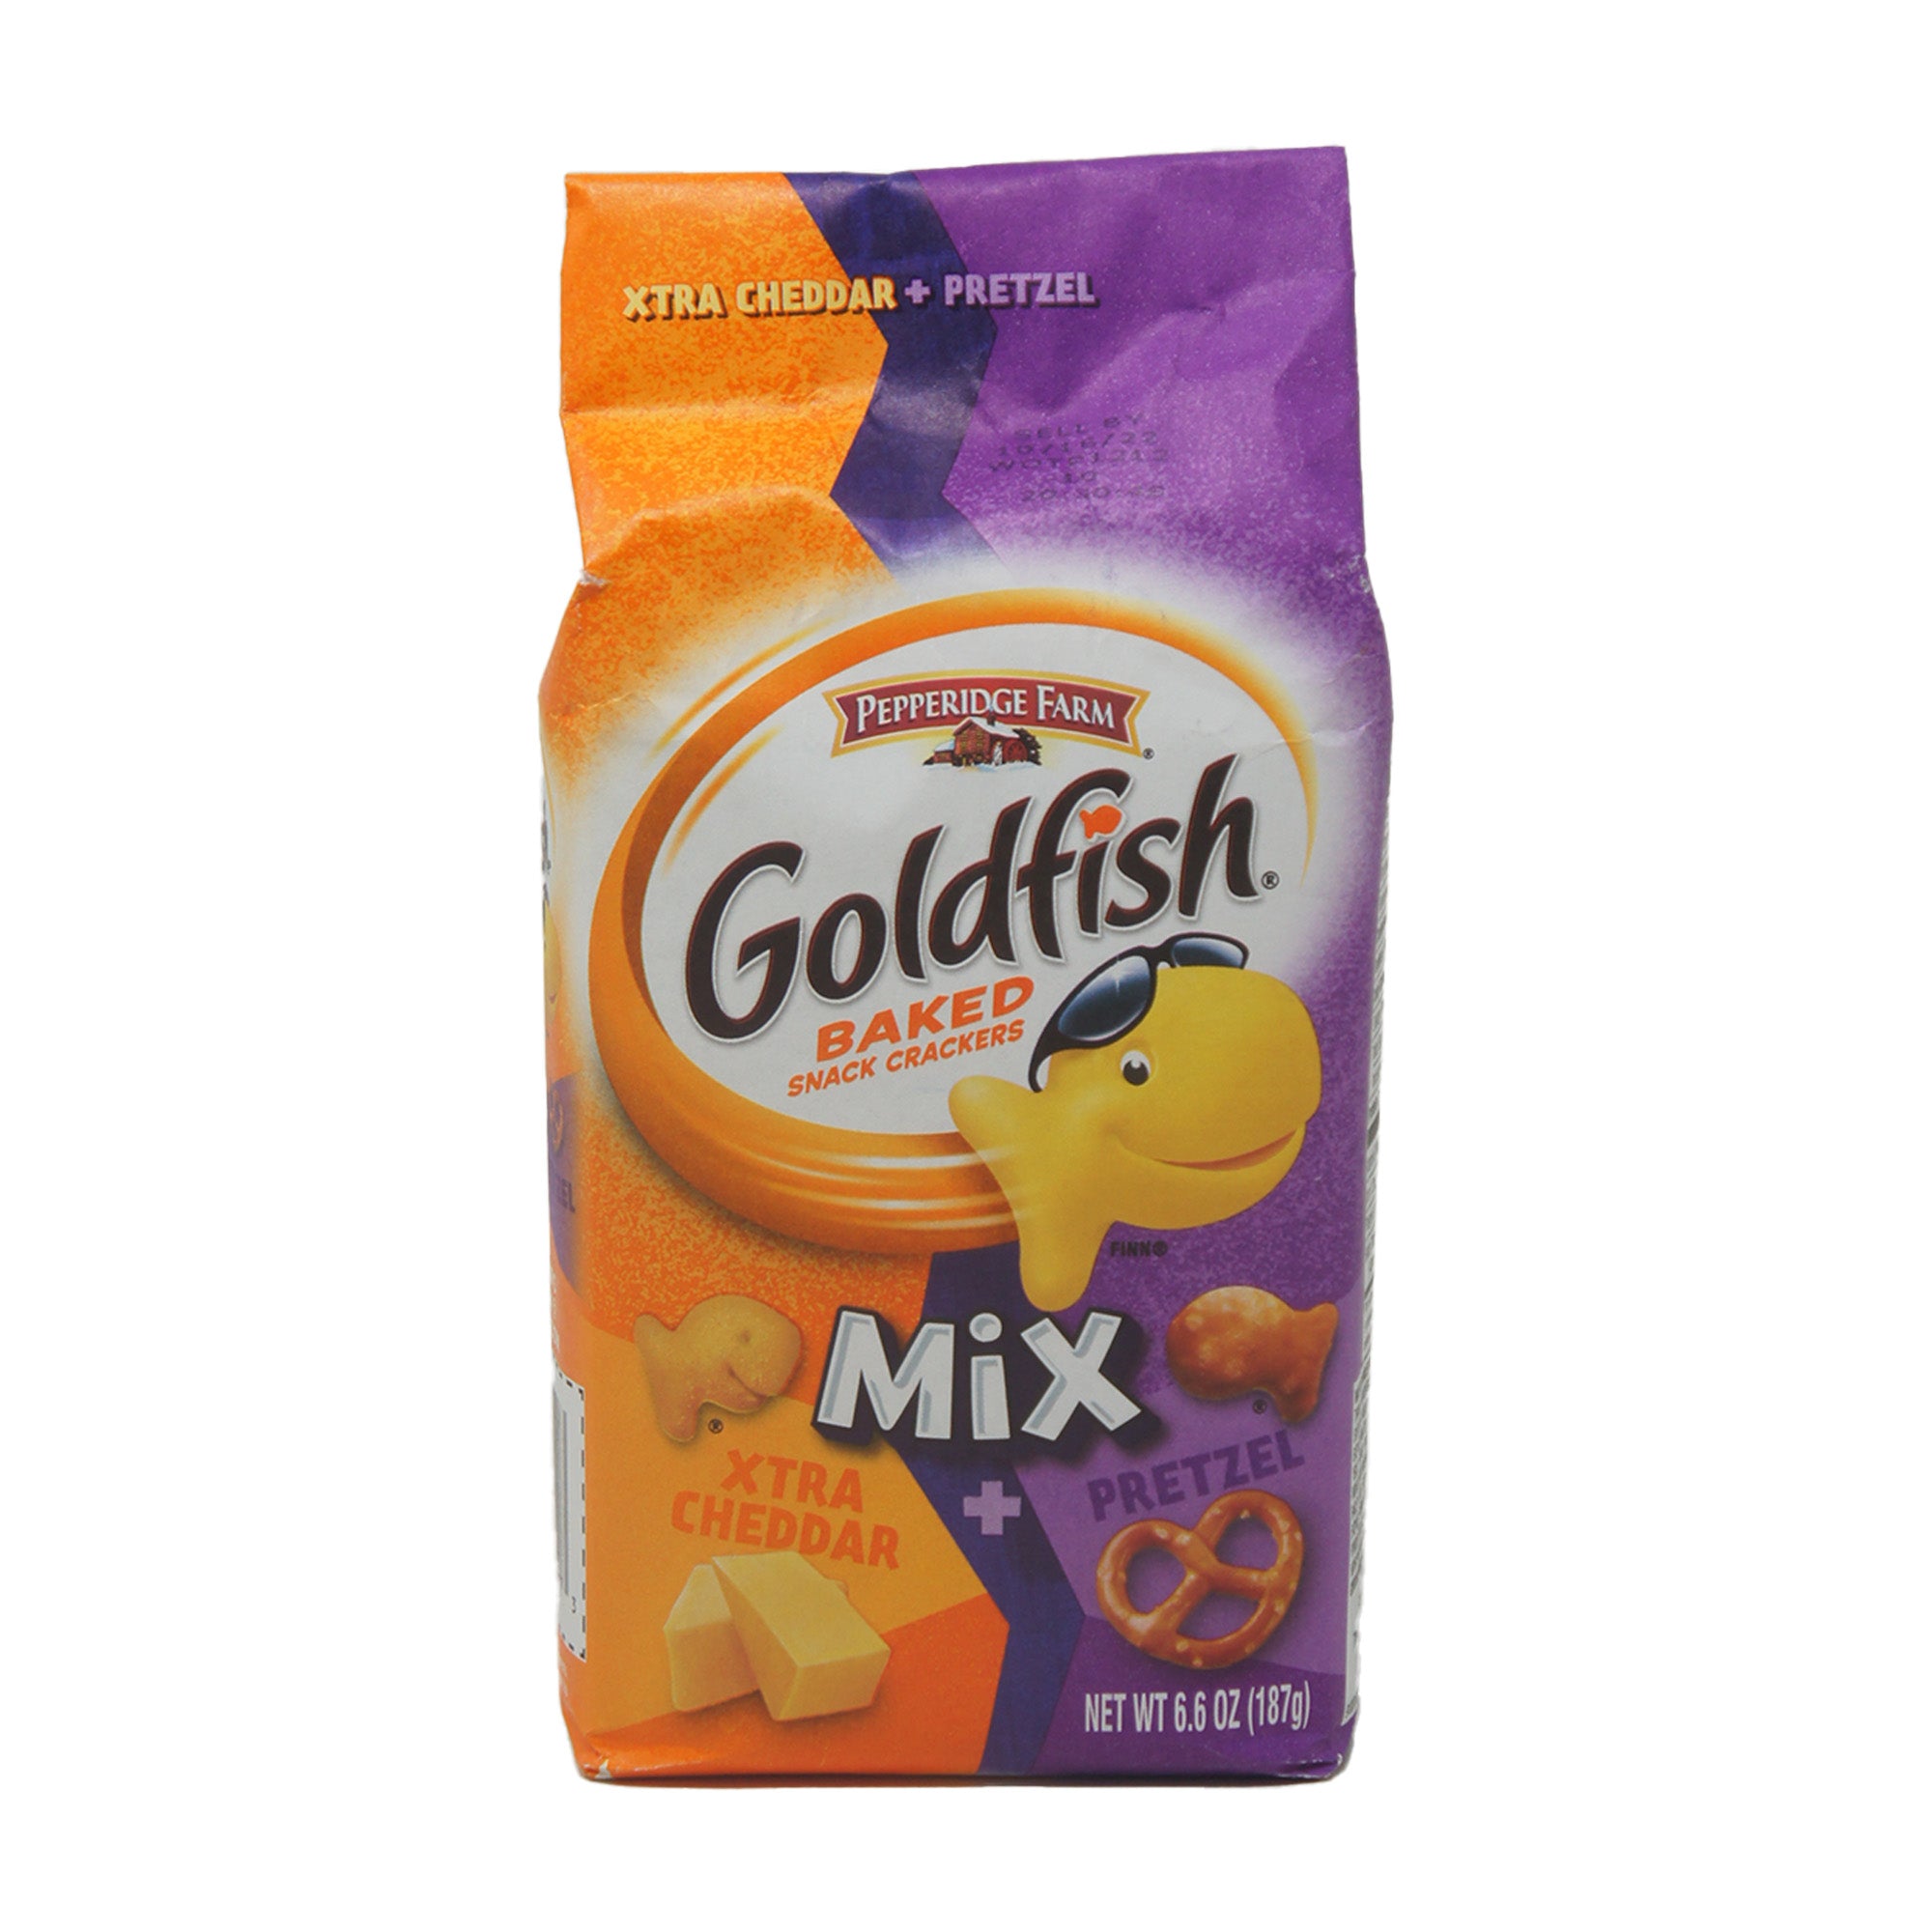 Goldfish Baked Snack Crackers Mix, Xtra Cheddar and Pretzel, 6.6 oz Pack